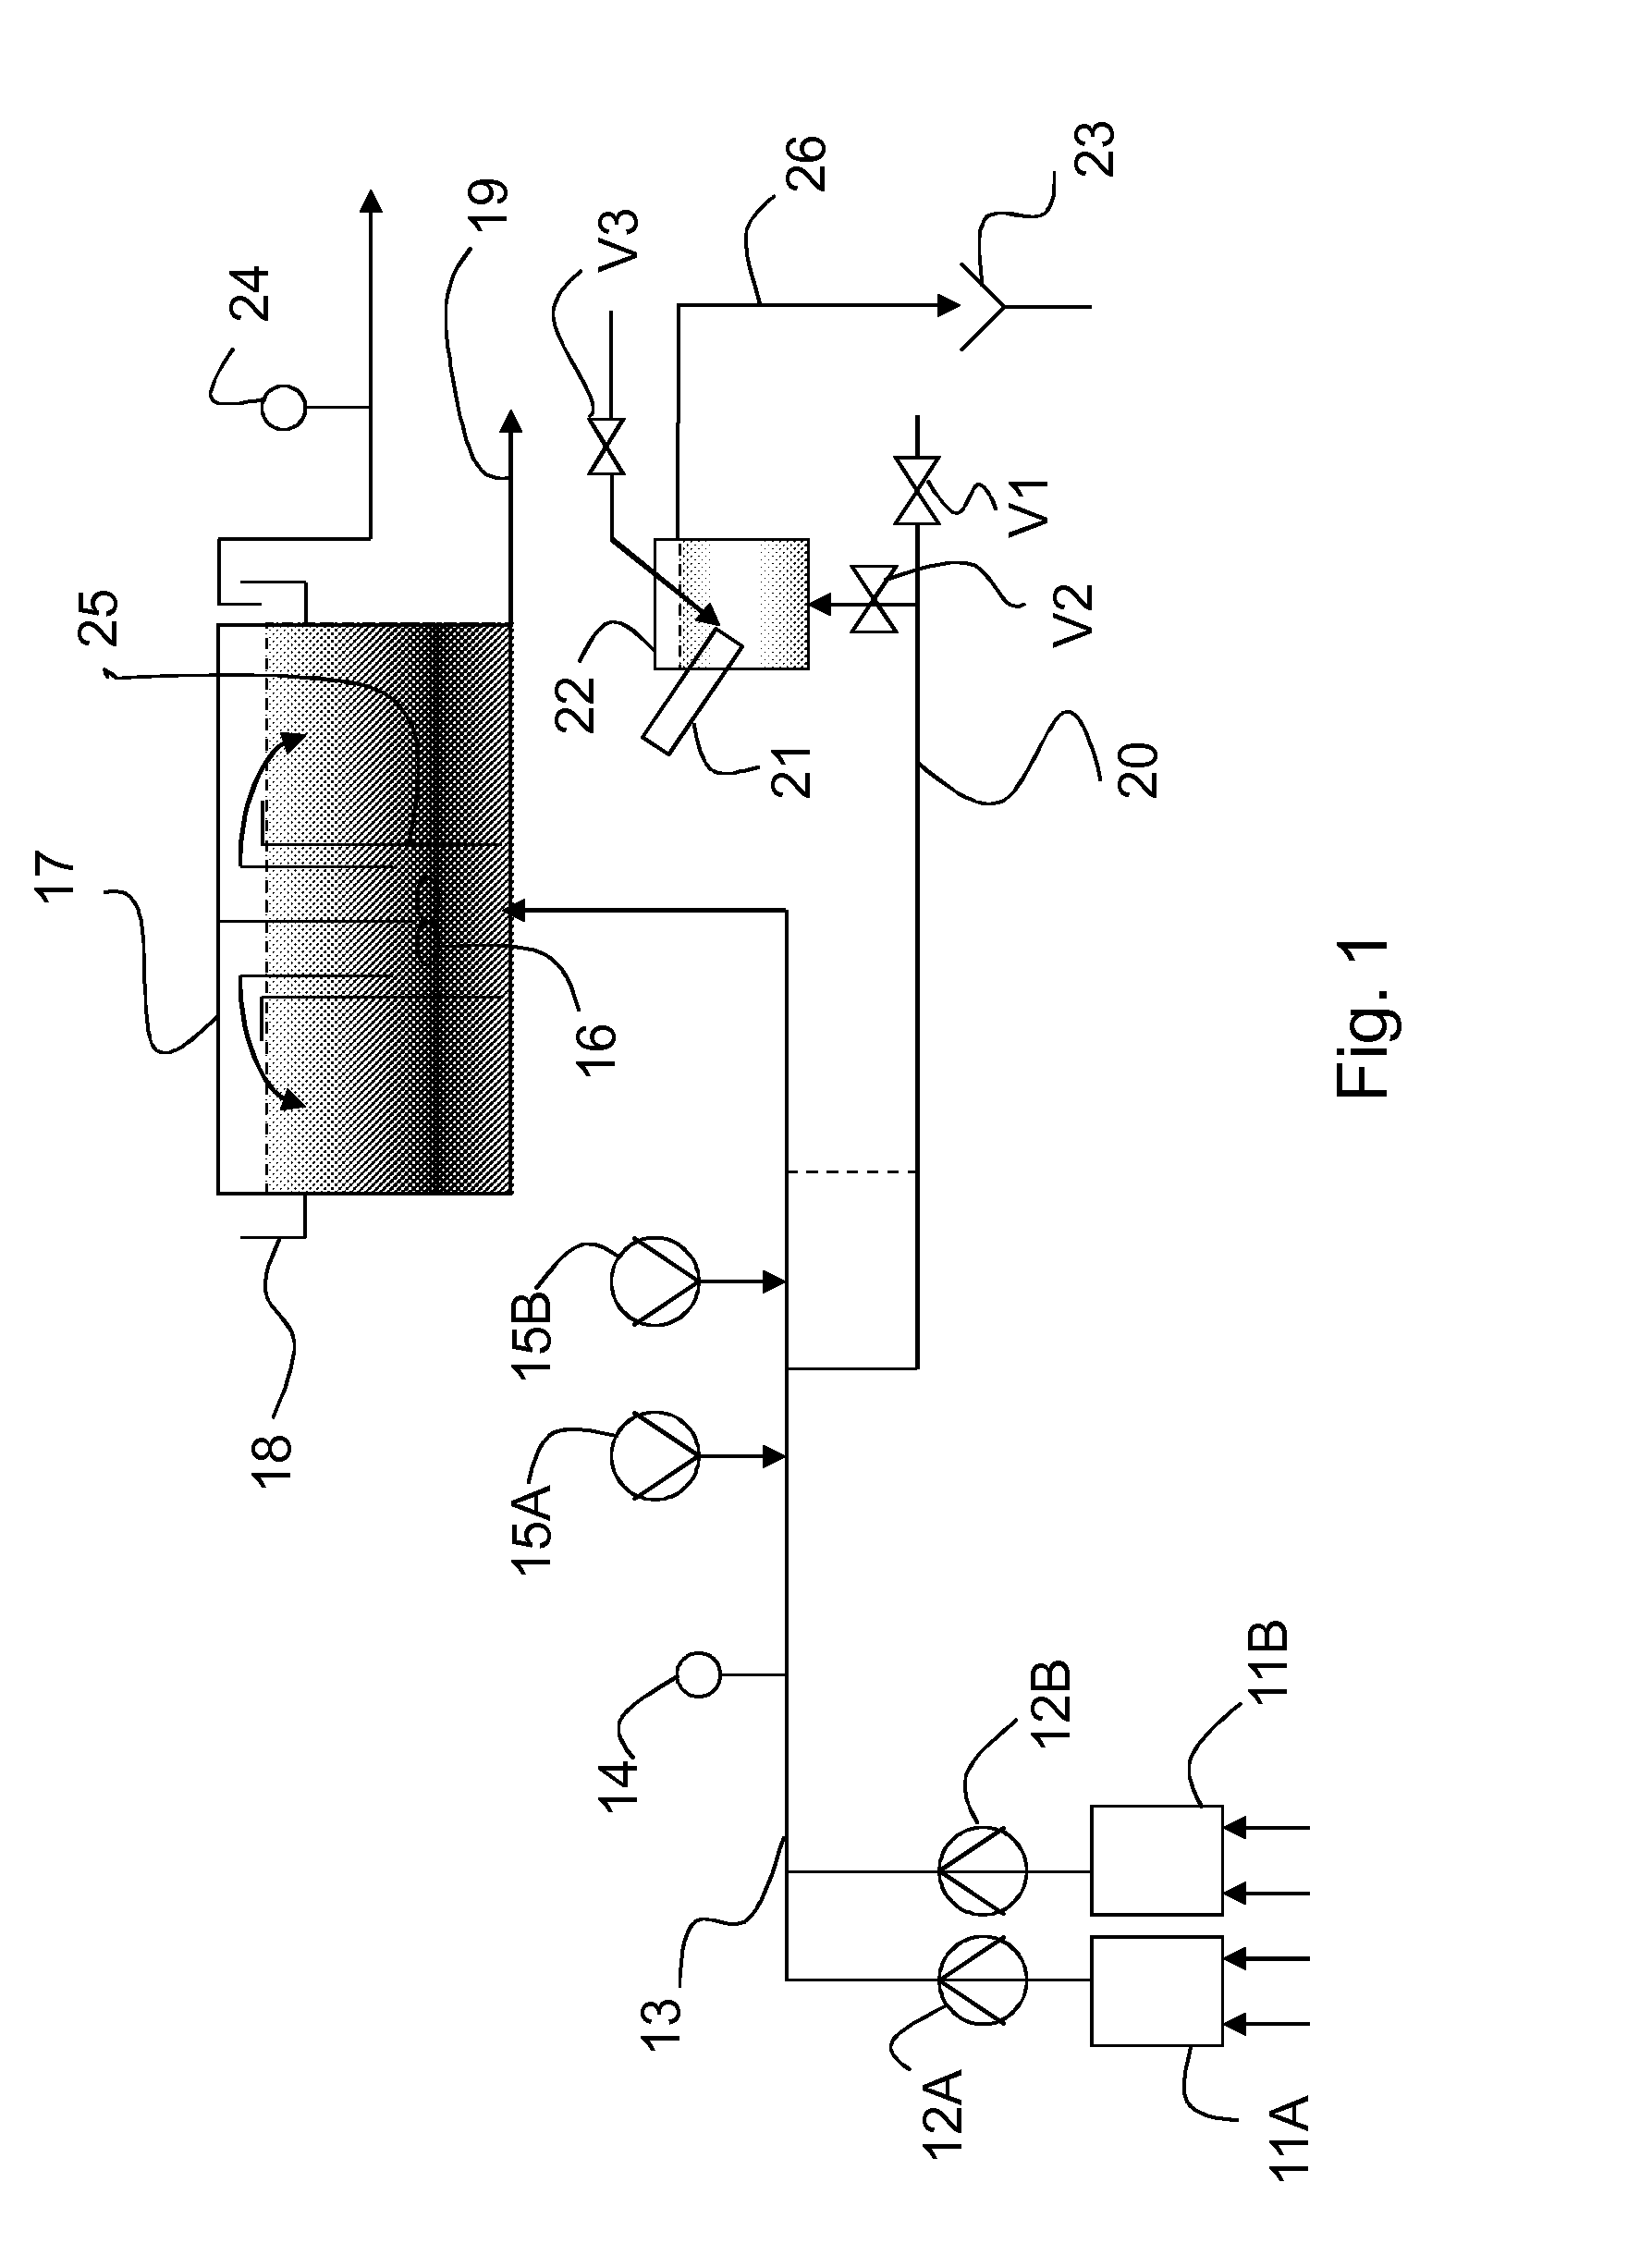 Method and system for treating aqueous streams